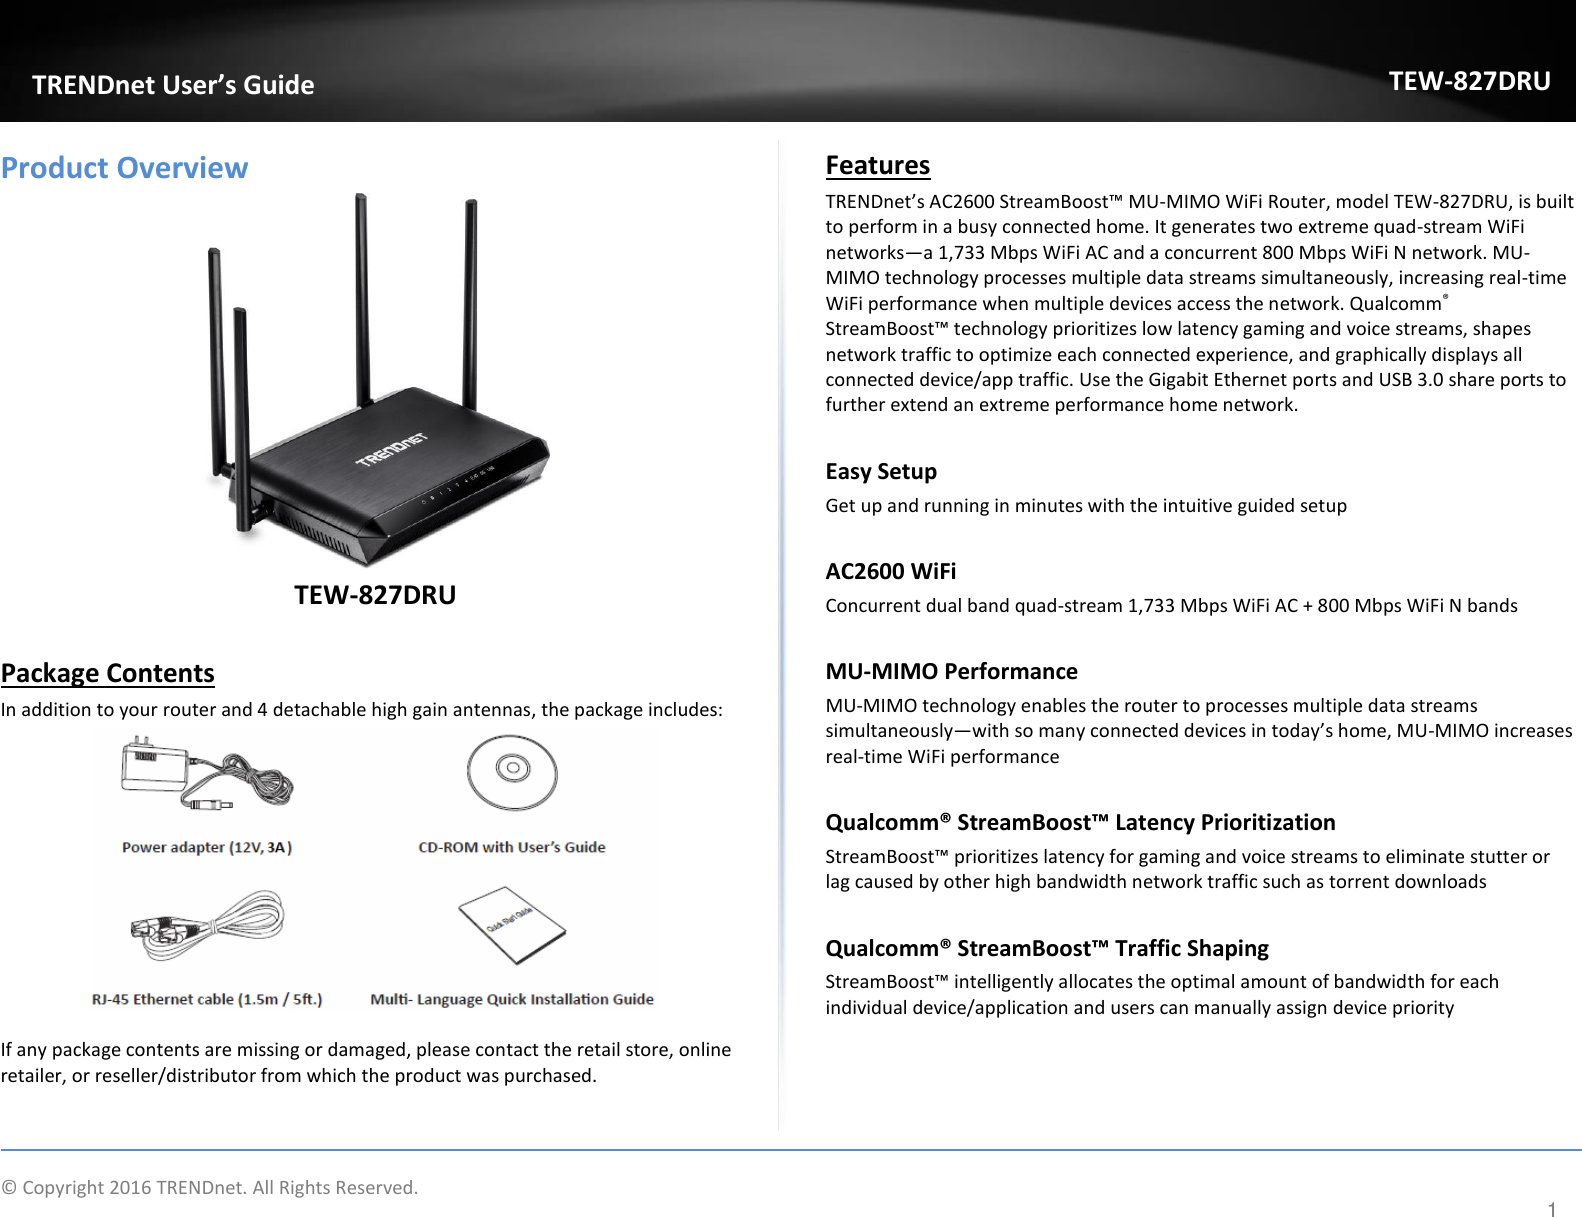             © Copyright 2016 TRENDnet. All Rights Reserved.       TRENDet User’s Guide TEW-827DRU 1 Product Overview  TEW-827DRU  Package Contents In addition to your router and 4 detachable high gain antennas, the package includes:   If any package contents are missing or damaged, please contact the retail store, online retailer, or reseller/distributor from which the product was purchased. Features  TREΠDet’s AC “teaBoost™ MU-MIMO WiFi Router, model TEW-827DRU, is built to perform in a busy connected home. It generates two extreme quad-stream WiFi networks—a 1,733 Mbps WiFi AC and a concurrent 800 Mbps WiFi N network. MU-MIMO technology processes multiple data streams simultaneously, increasing real-time WiFi performance when multiple devices access the network. Qualcomm® “teaBoost™ teholog pioitizes lo late gaig ad oie steas, shapes network traffic to optimize each connected experience, and graphically displays all connected device/app traffic. Use the Gigabit Ethernet ports and USB 3.0 share ports to further extend an extreme performance home network.   Easy Setup Get up and running in minutes with the intuitive guided setup  AC2600 WiFi Concurrent dual band quad-stream 1,733 Mbps WiFi AC + 800 Mbps WiFi N bands  MU-MIMO Performance MU-MIMO technology enables the router to processes multiple data streams simultaneously—ith so a oeted deies i toda’s hoe, MU-MIMO increases real-time WiFi performance   Qualo® “treaBoost™ Latey Prioritizatio StreamBoost™ prioritizes latency for gaming and voice streams to eliminate stutter or lag caused by other high bandwidth network traffic such as torrent downloads   Qualo® “treaBoost™ Traffi “hapig  StreamBoost™ intelligently allocates the optimal amount of bandwidth for each individual device/application and users can manually assign device priority      